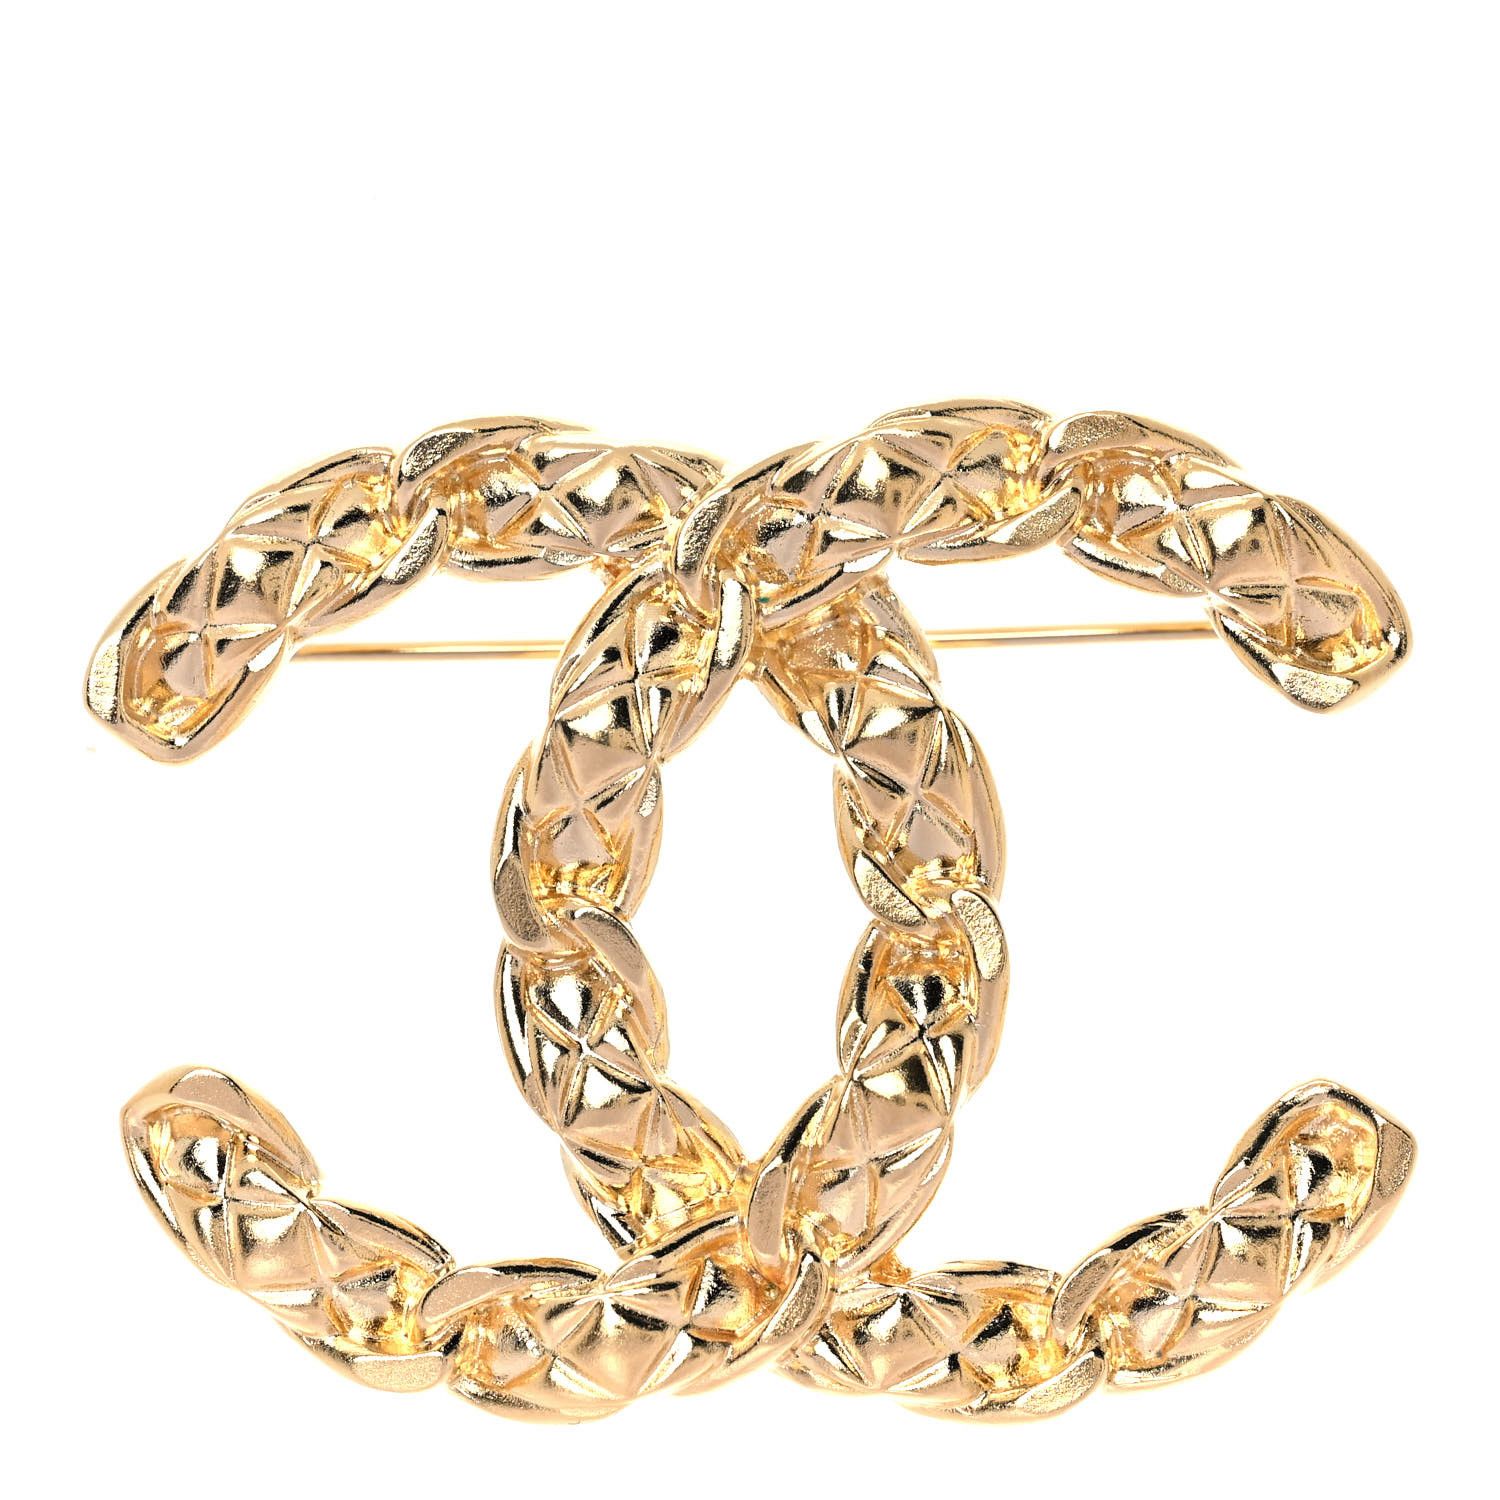 CHANEL Quilted CC Brooch Gold | FASHIONPHILE | Fashionphile